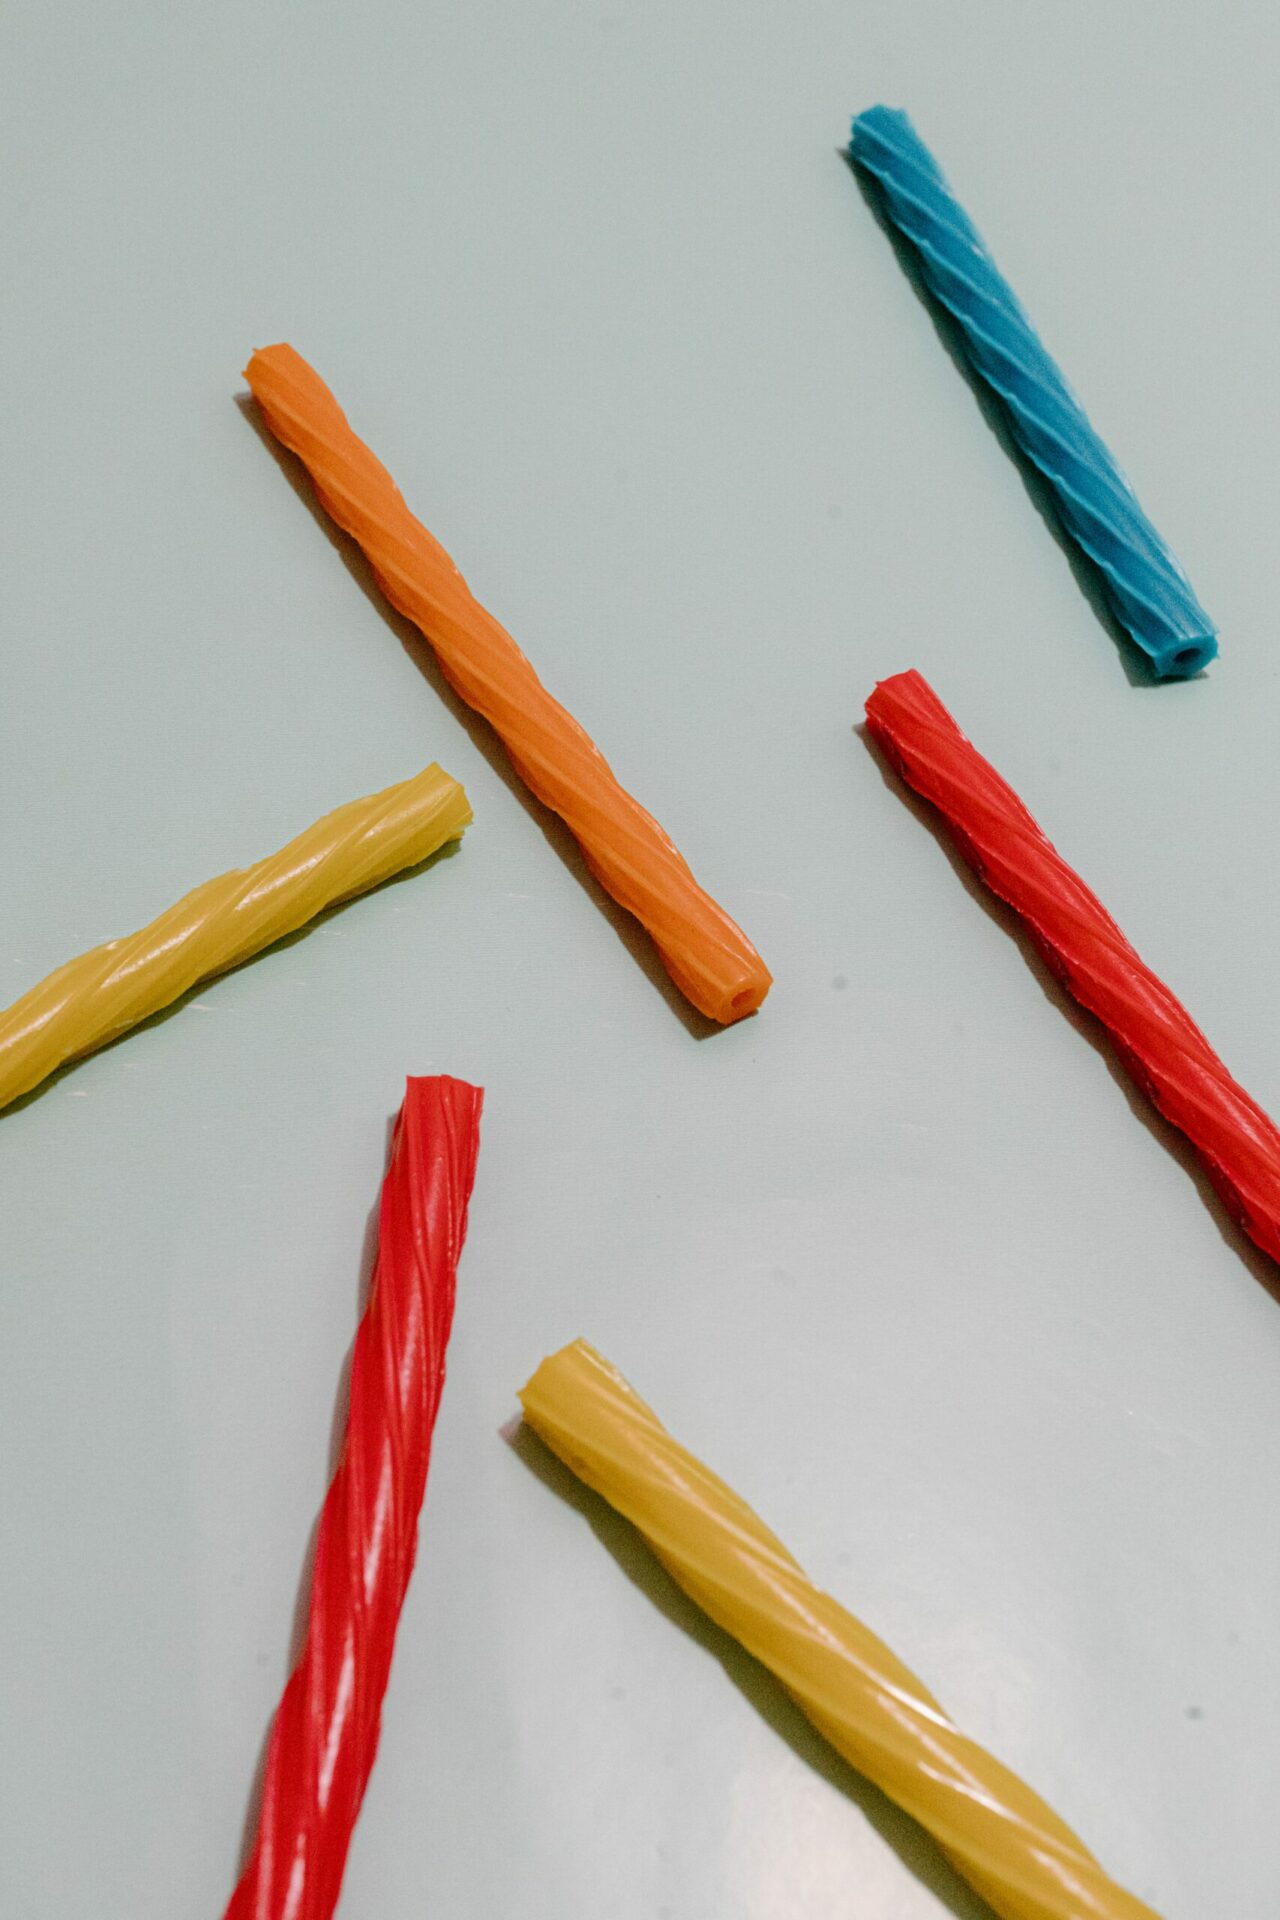 Revealed: Are Twizzlers Truly Vegan? What You Need to Know!